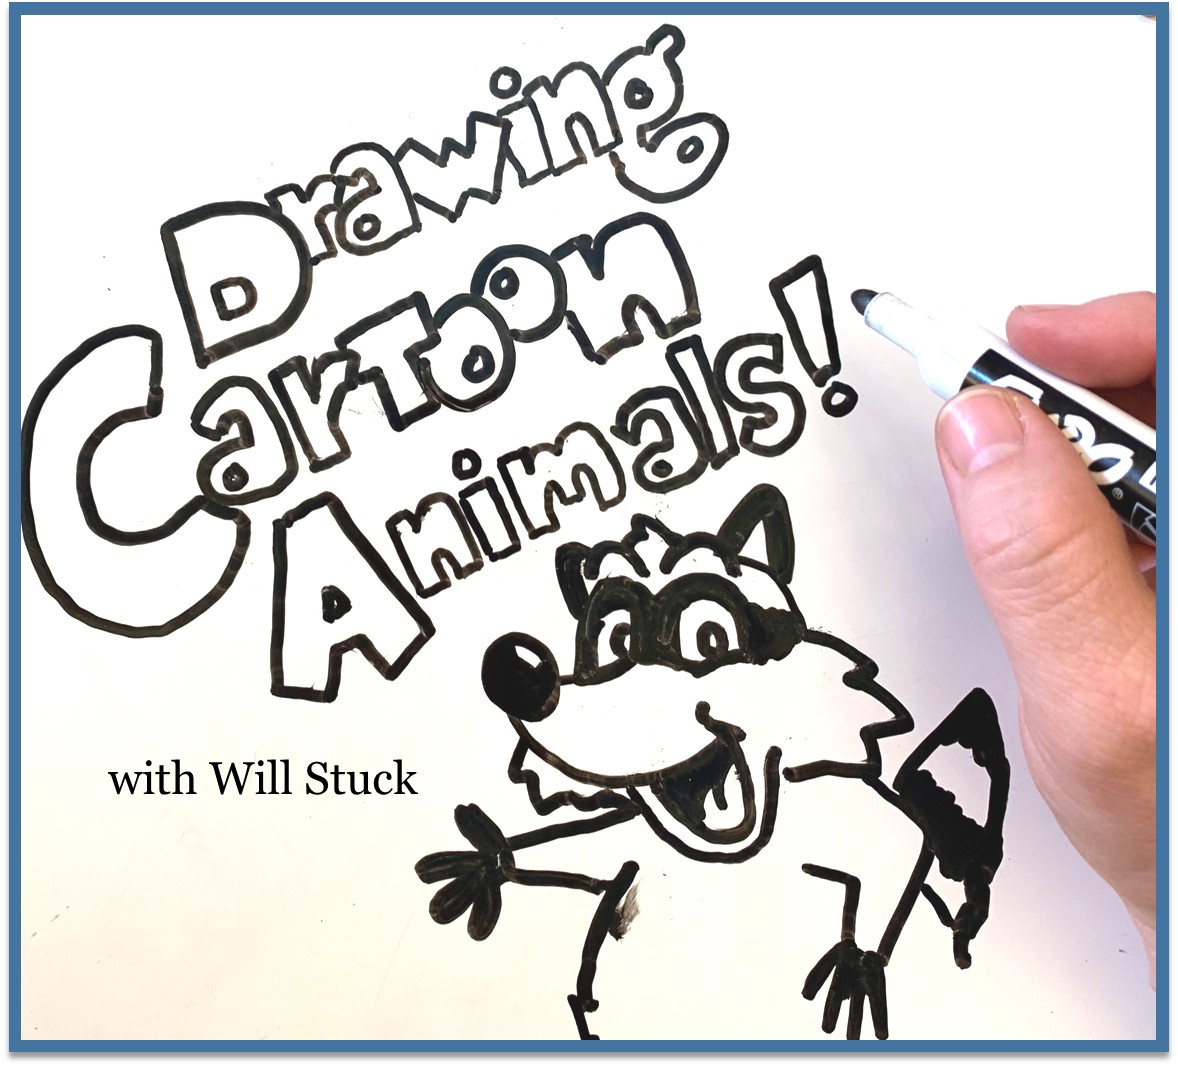 Drawing Cartoon Animals with Will Stuck